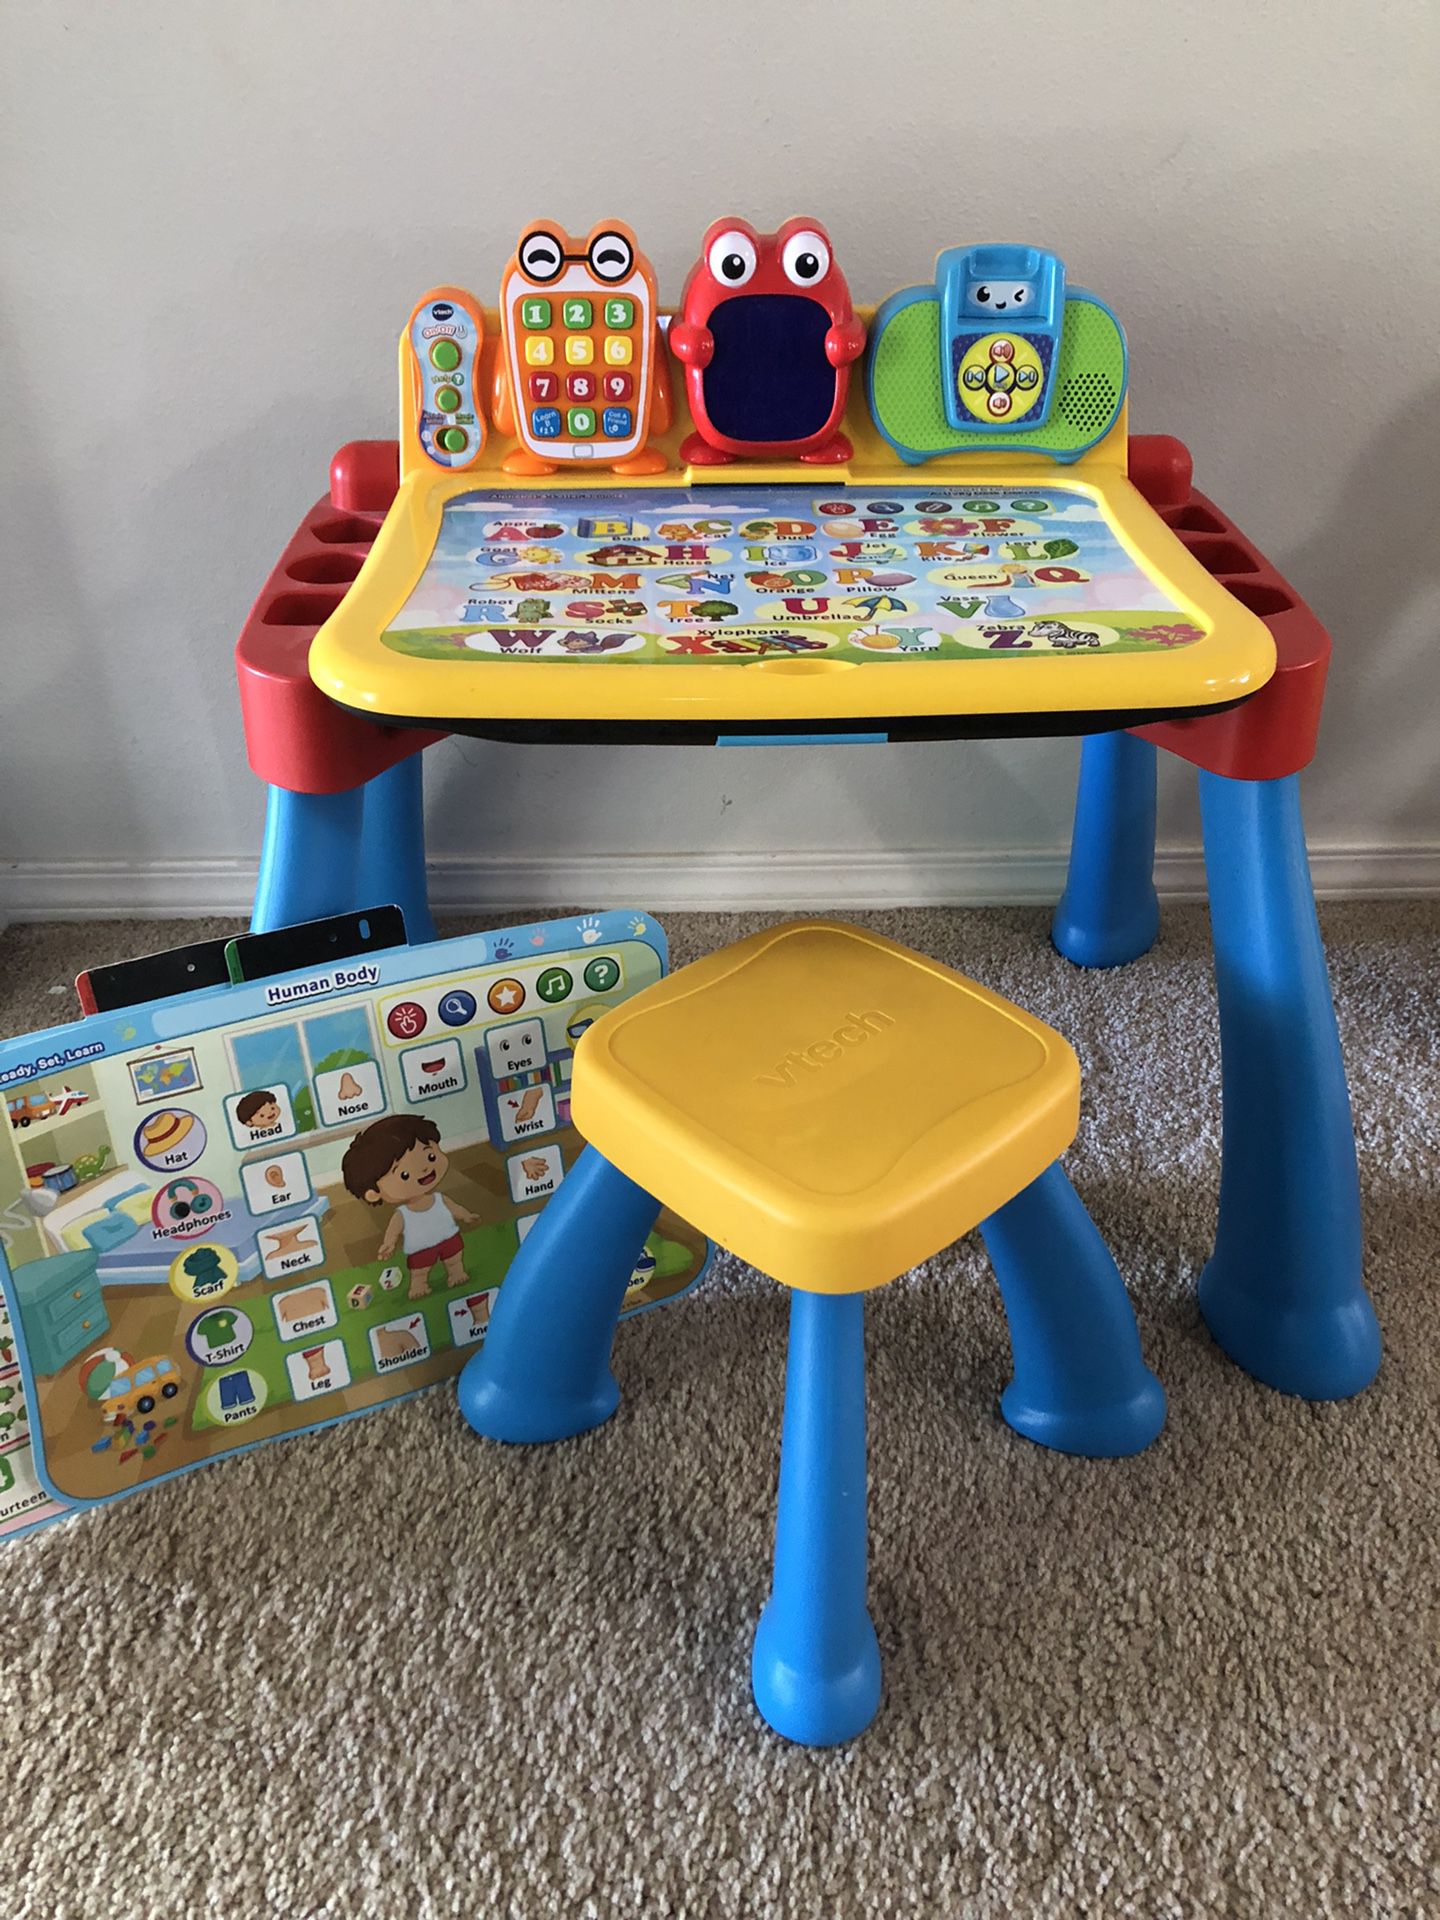 VTech Touch and Learn Activity Desk 